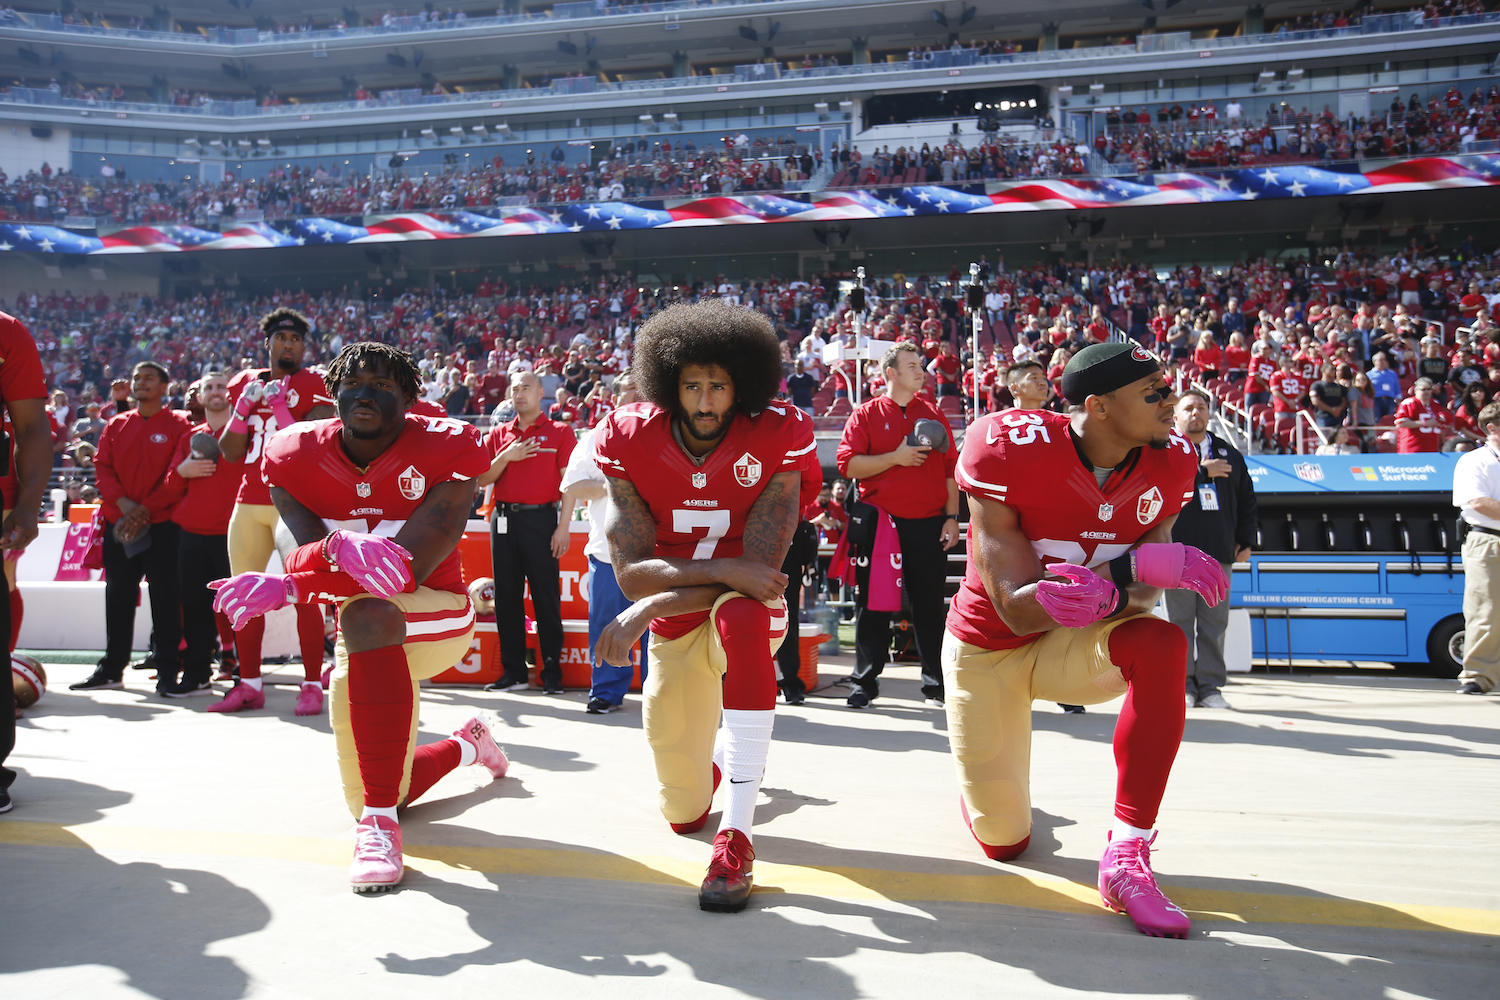 Colin Kaepernick's anthem protest is one of the enduring images of modern sports.